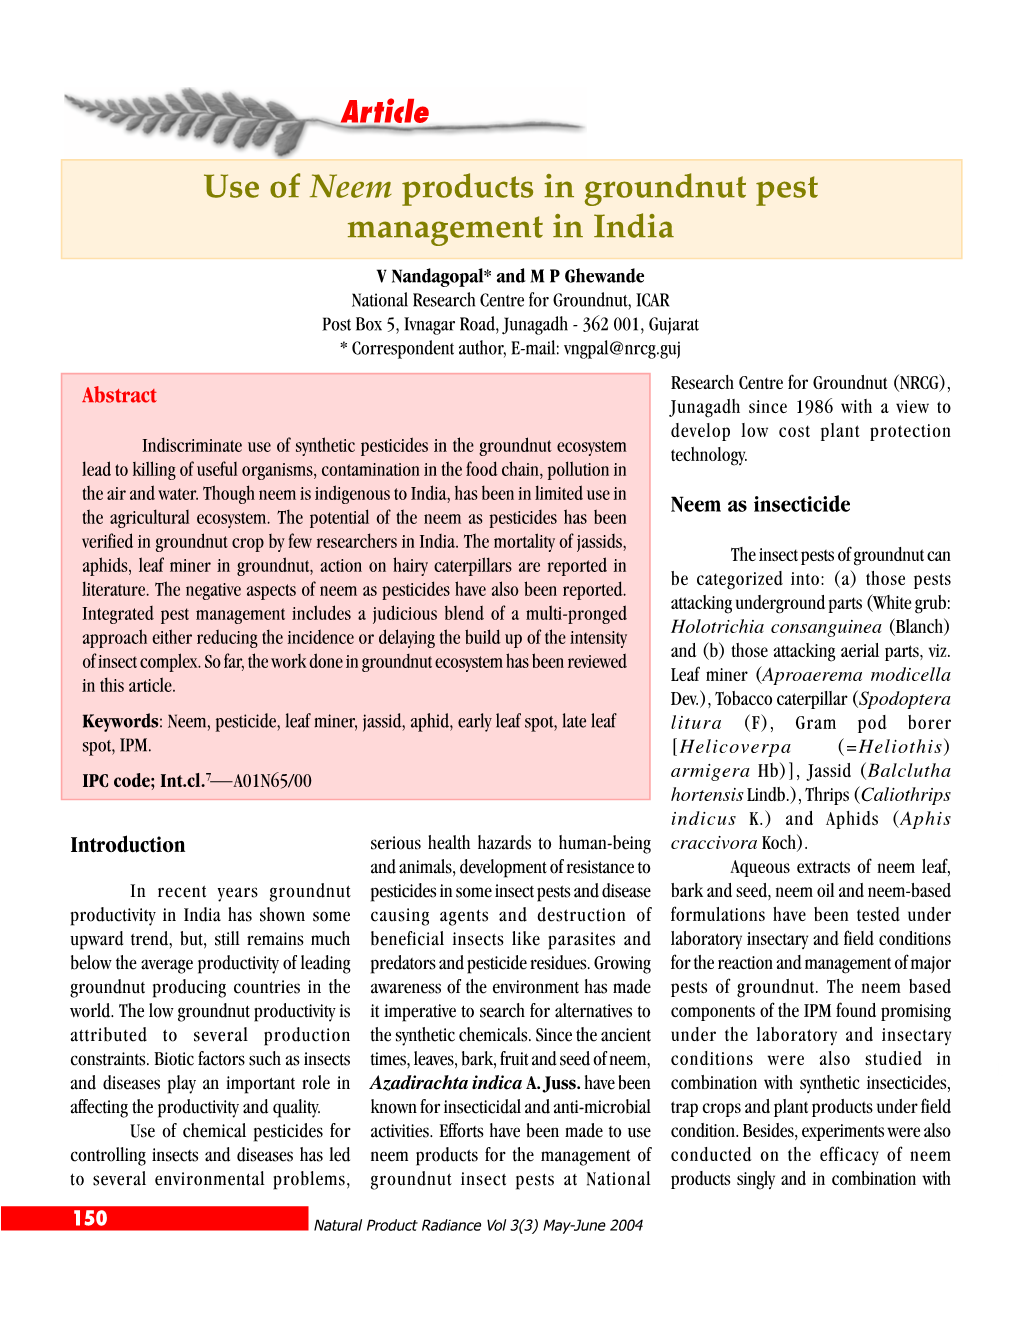 Use of Neem Products in Groundnut Pest Management in India